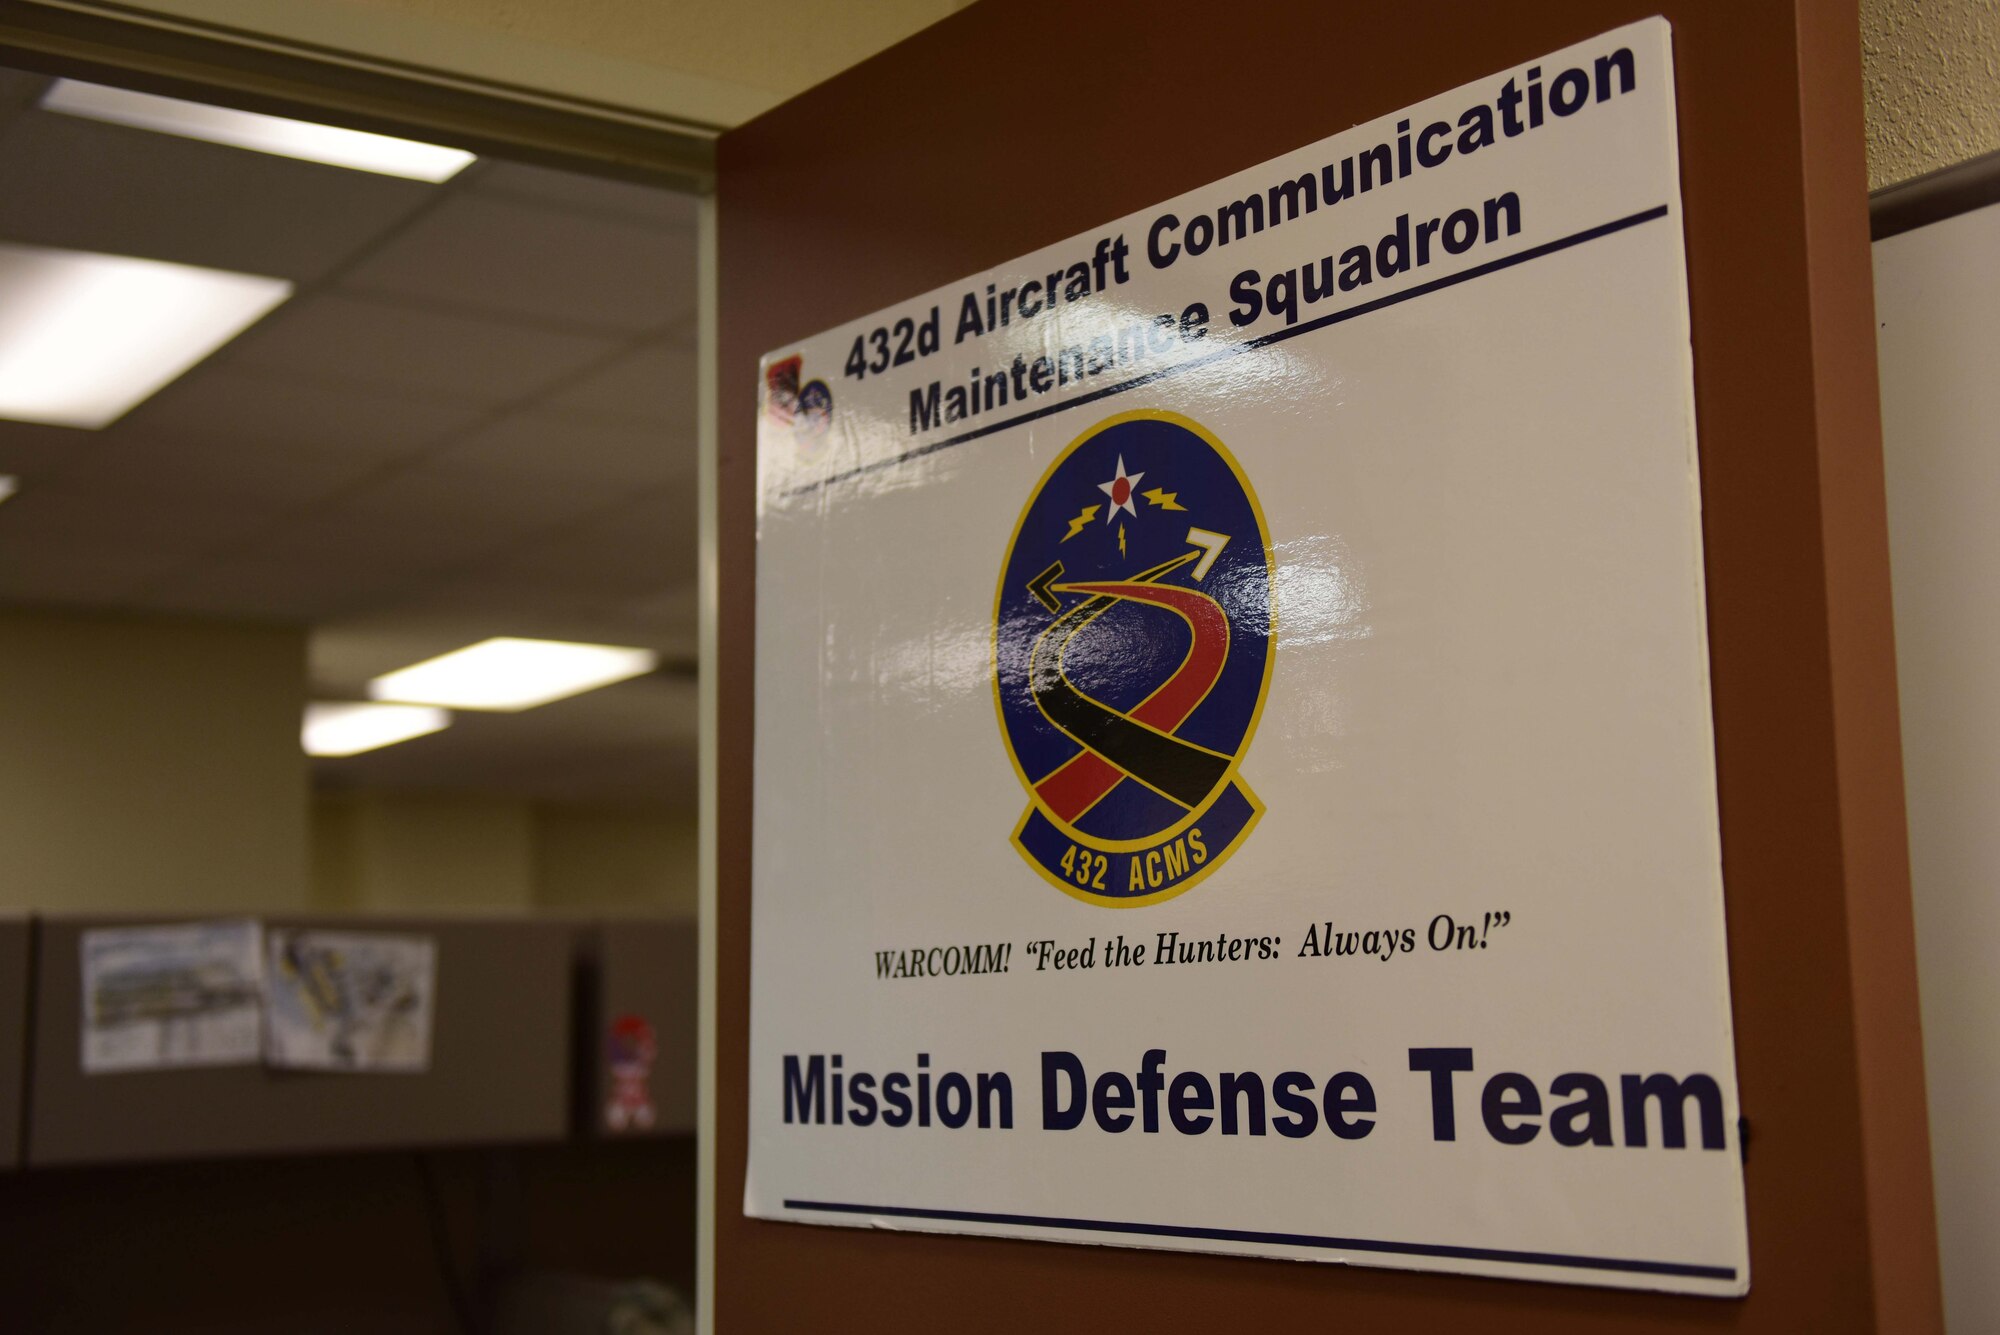 A Mission Defense Team sign hangs inside the 432nd Aircraft Communications Maintenance Squadron building at Creech Air Force Base, Nevada, April 29, 2019. MDTs are the result of the Cyber Squadron Initiative (CS-I), which is a plan to move communications squadrons away from Information Technology (IT) service and toward a mission set that involves the cyberspace side of their wing’s operational mission. (U.S. Air Force photo by Airman 1st Class Haley Stevens)